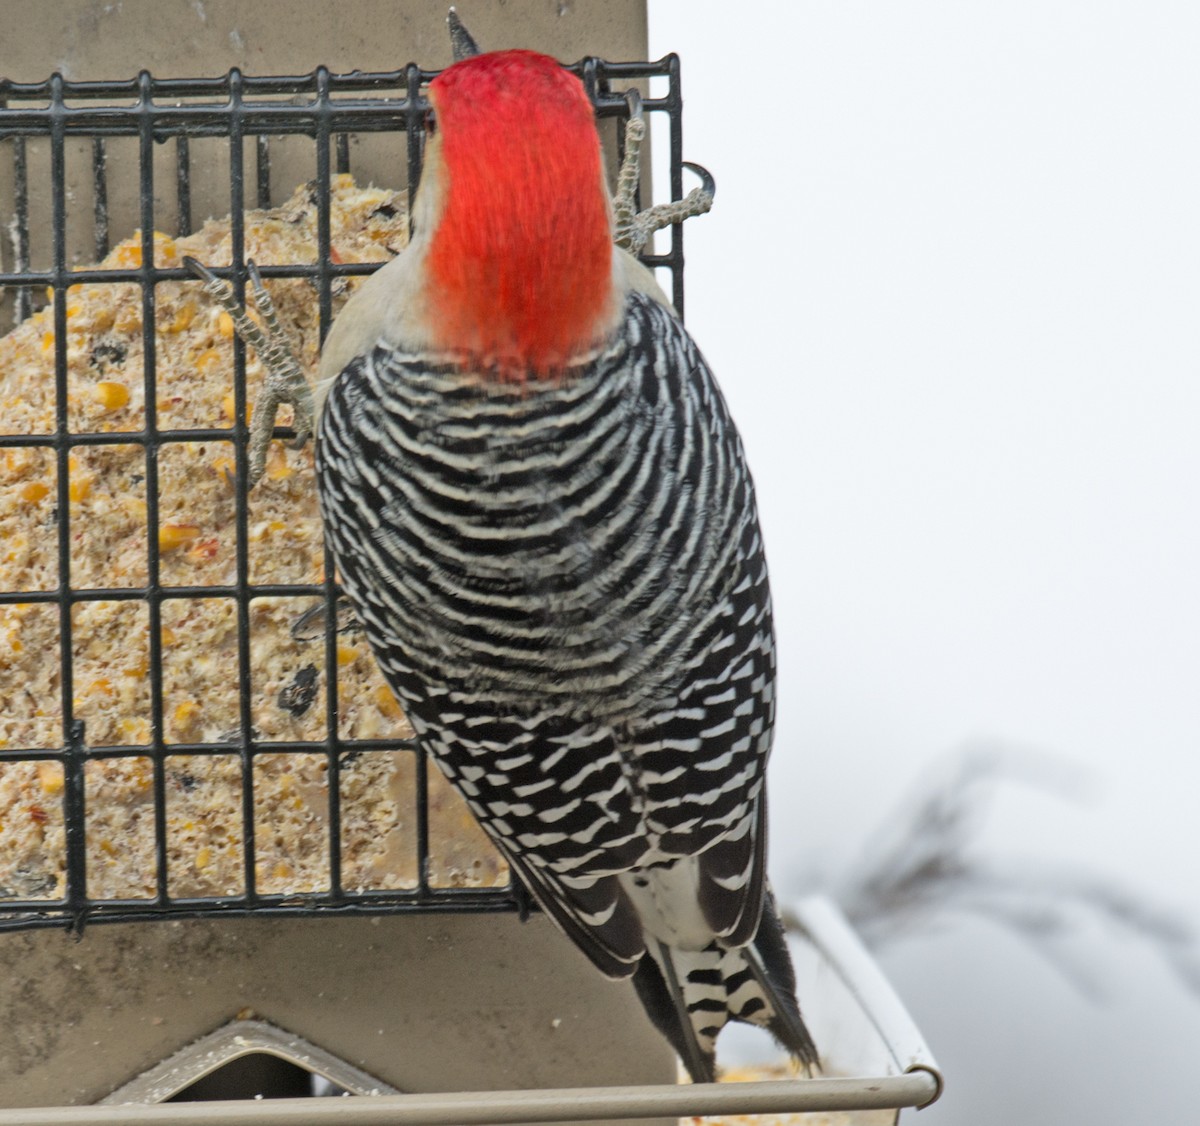 Red-bellied Woodpecker - Jack and Shirley Foreman